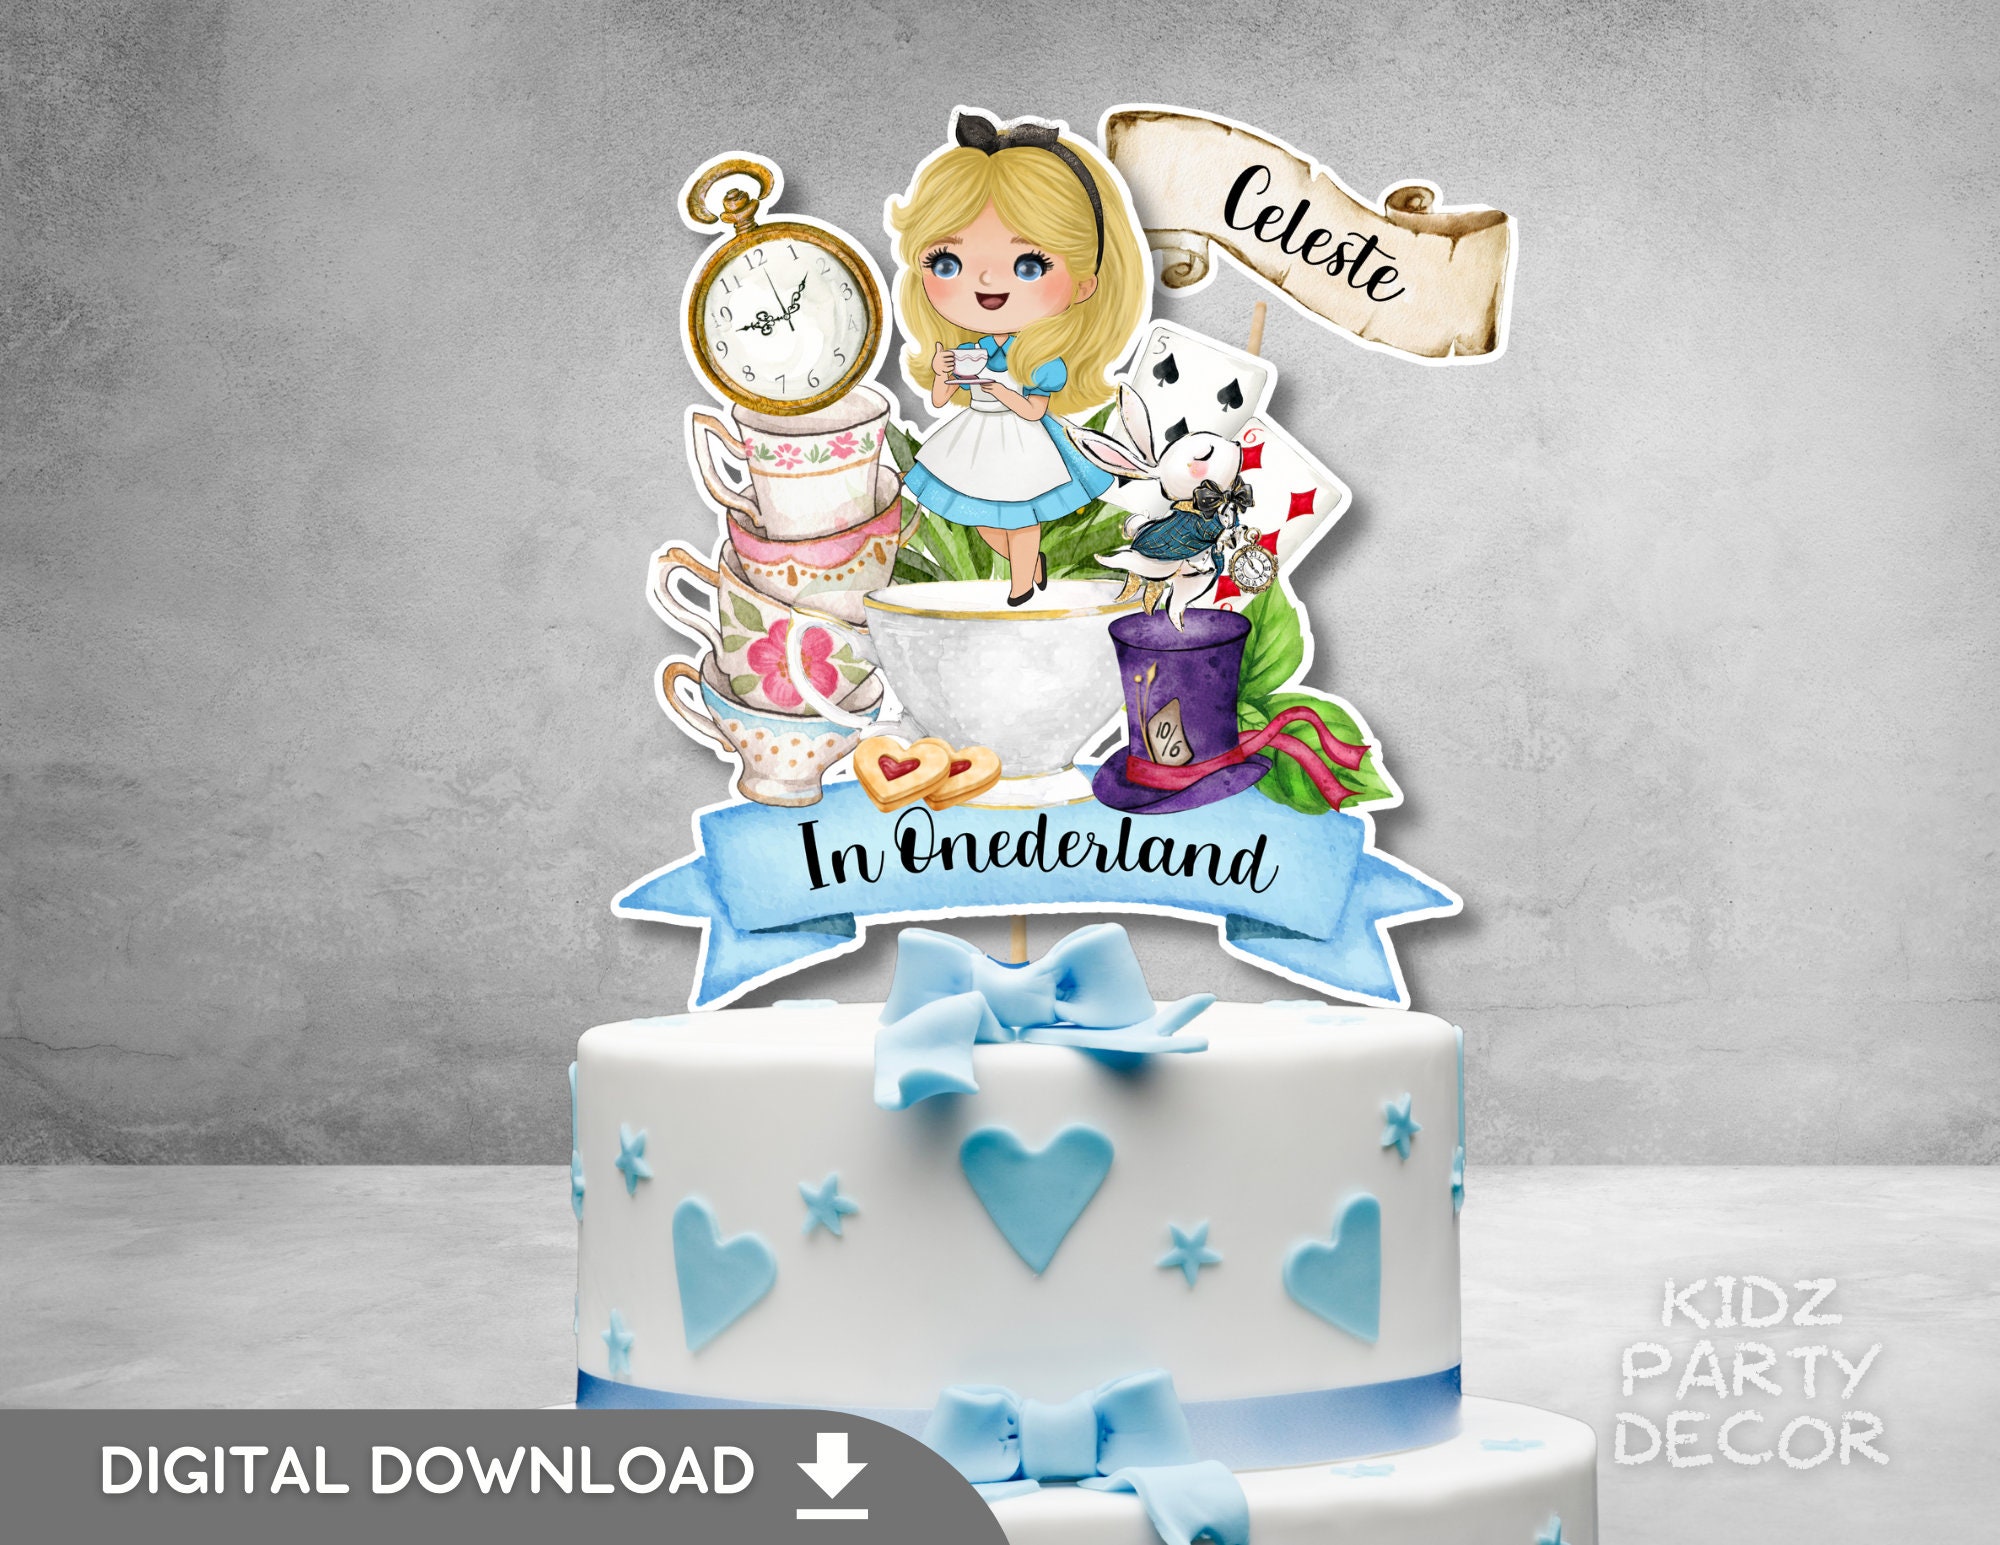  Alice Wonderland Birthday Party Decorations, Alice Wonderland  Themed Party Pack Supplies with Happy Birthday Banner,Cake Topper,Cupcake  Toppers,Balloons for Boys Girls Birthday Birthday Party : Toys & Games